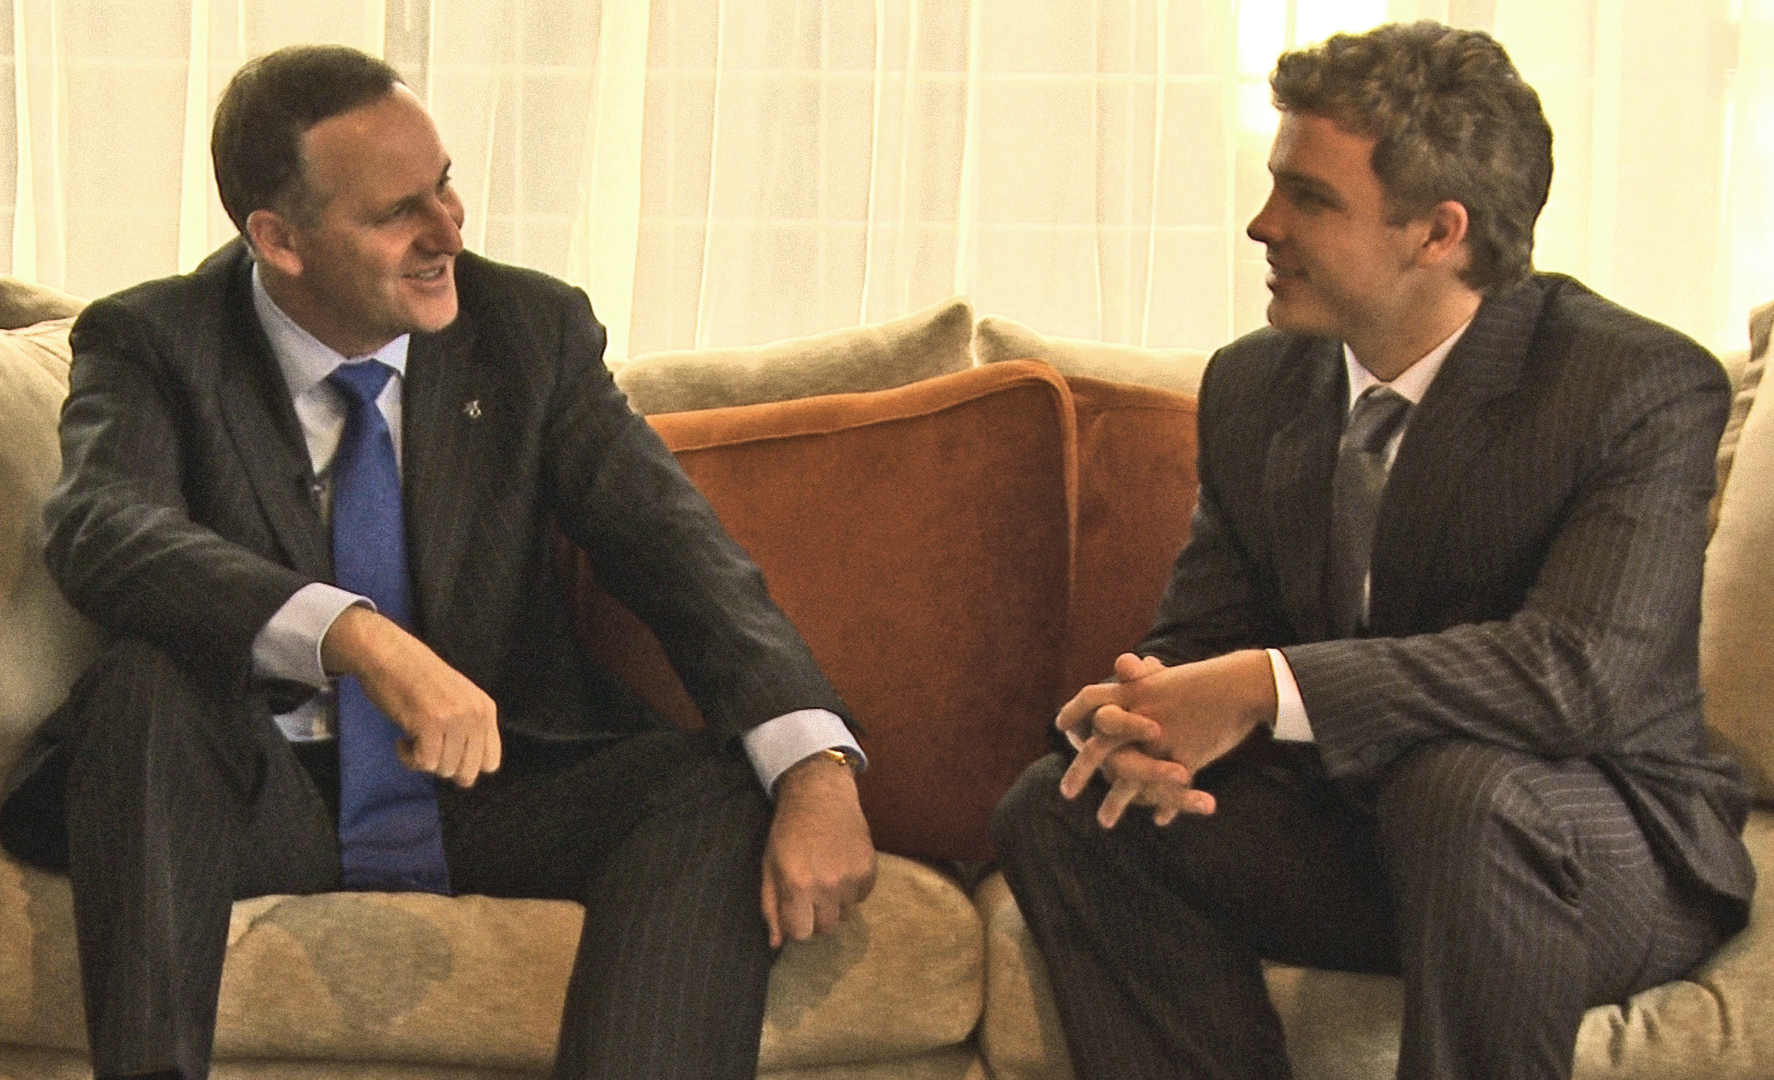 Julian Shaw interviews New Zealand Prime Minister John Key for 'Cup of Dreams.'